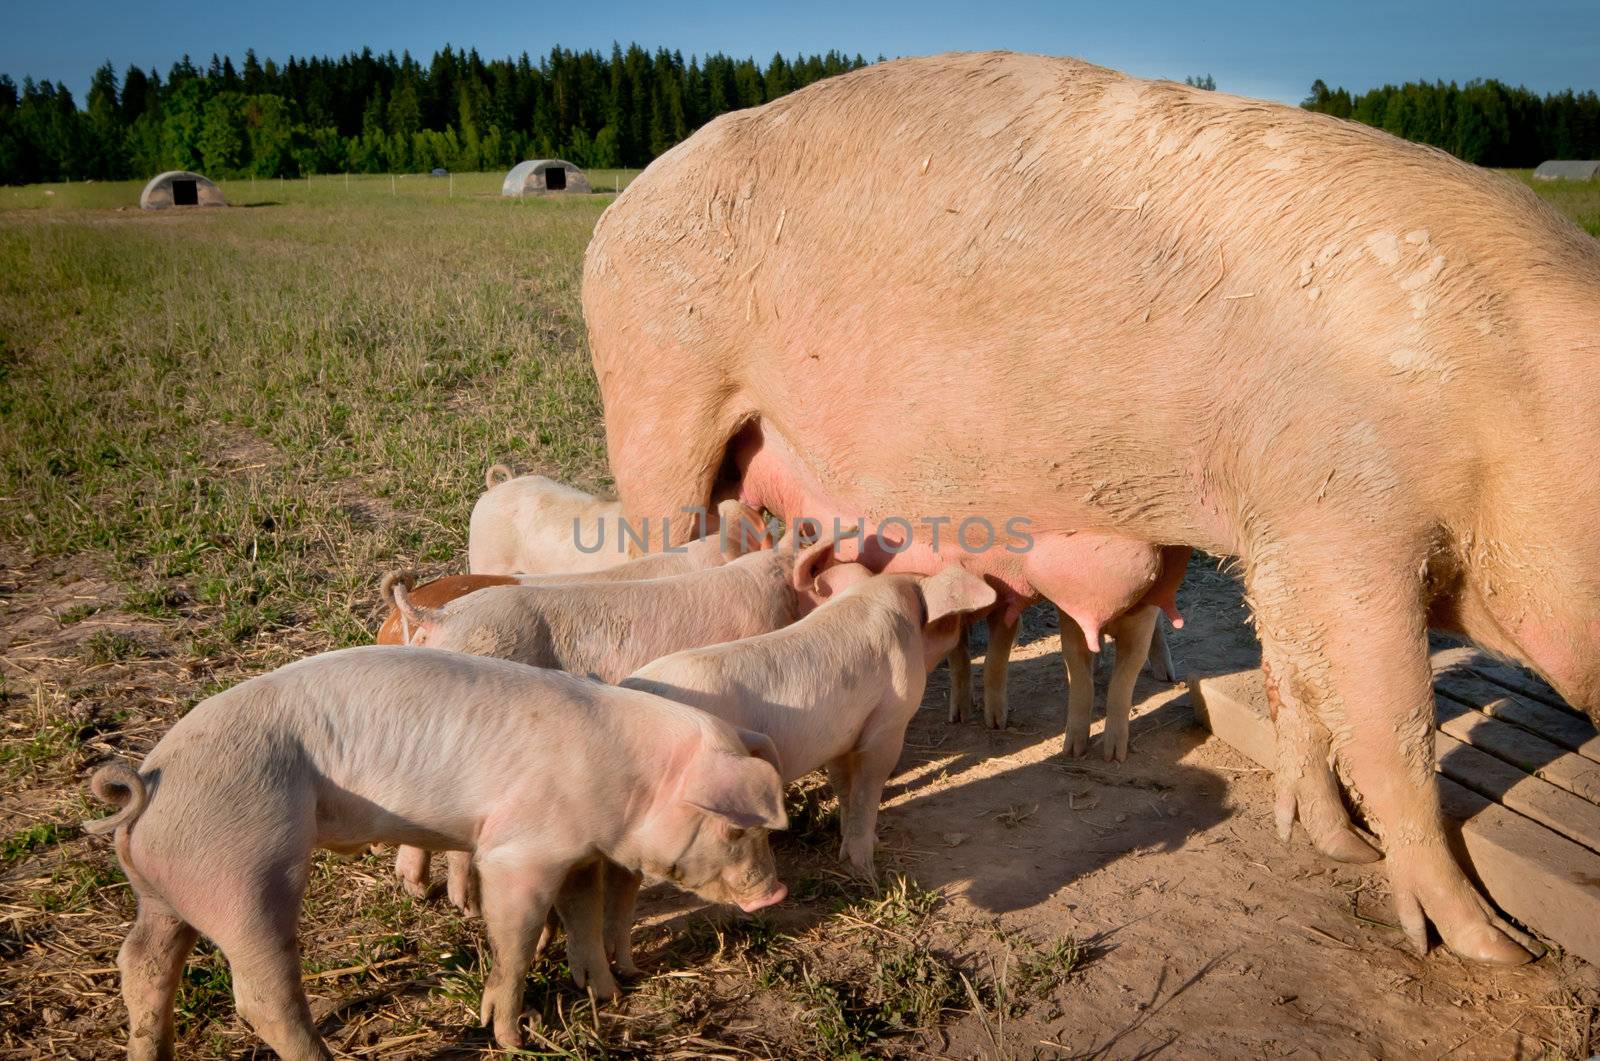 Some cute young pigs feeding on mom